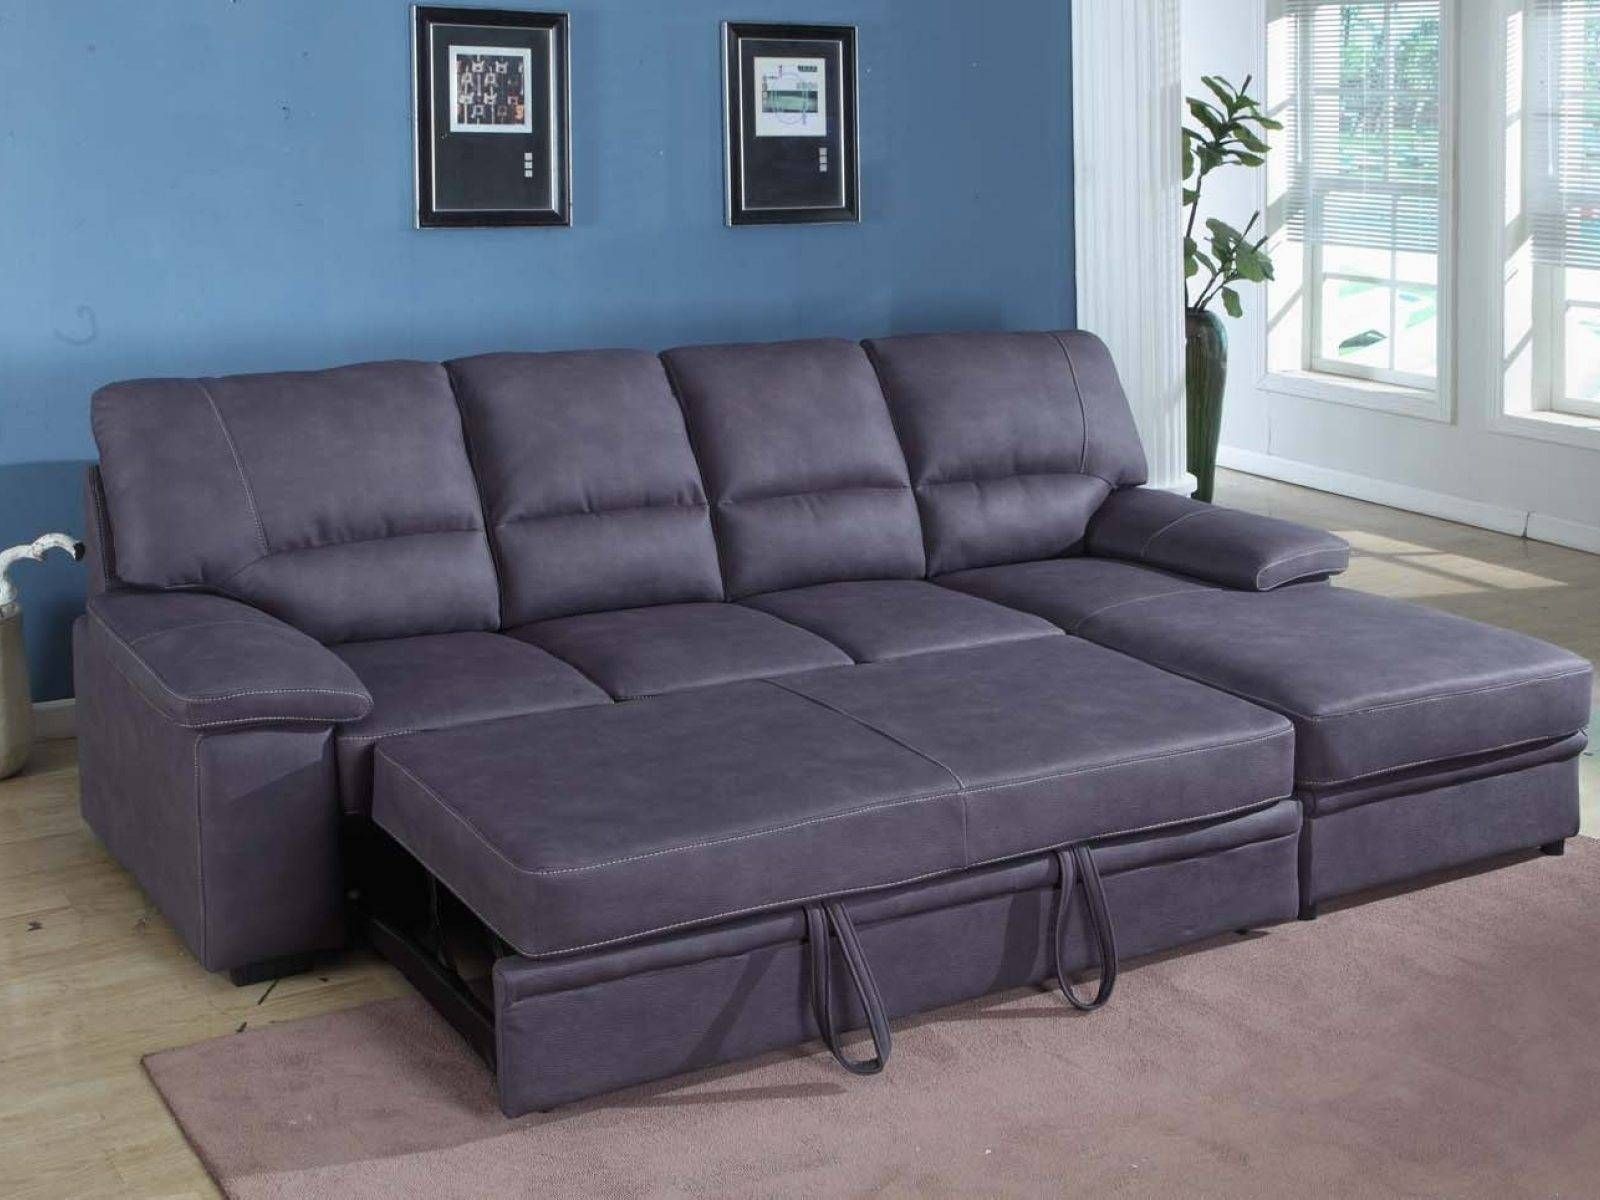 ▻ Sofa : 14 Brilliant Sectional Sleeper Sofa With Chaise Cool Throughout Sectional Sleeper Sofas With Chaise (View 22 of 30)